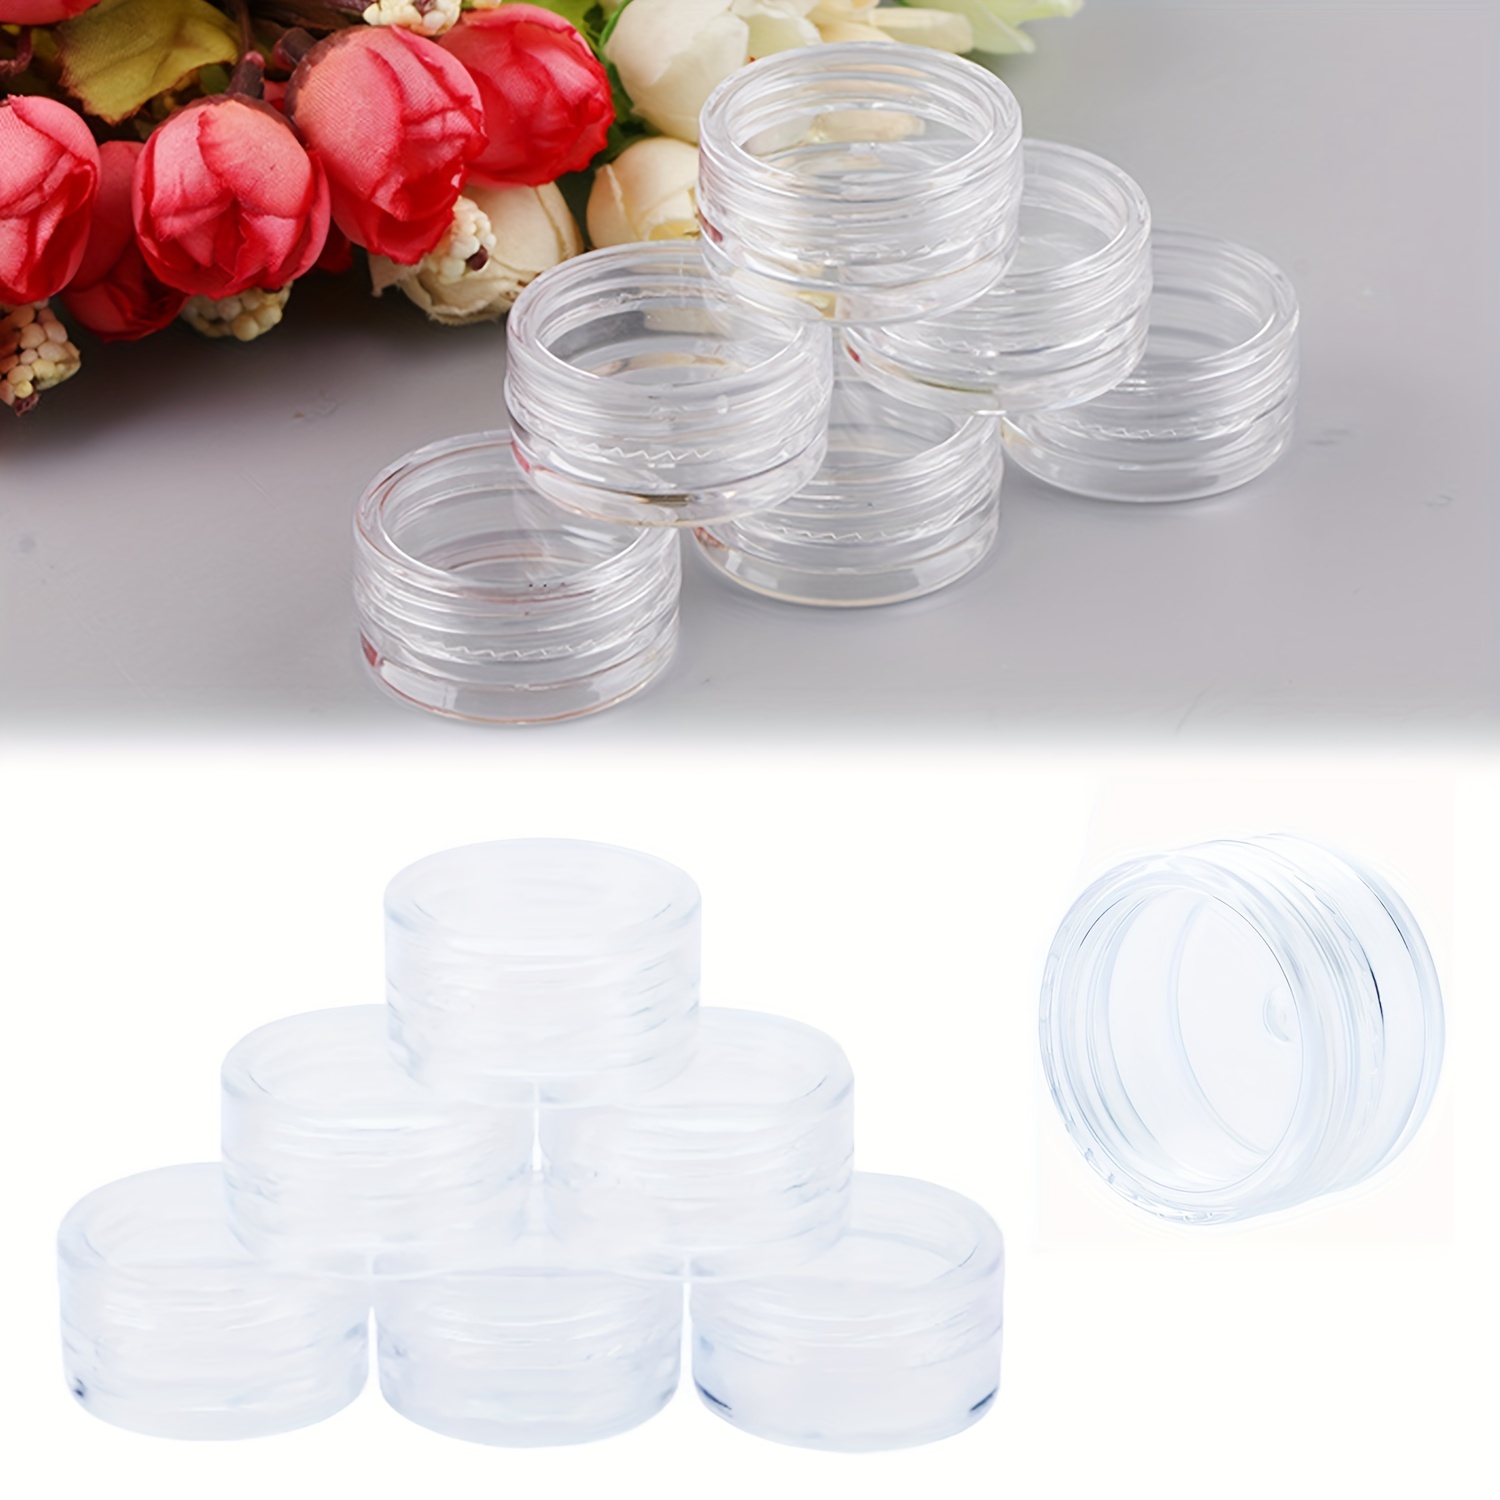 5 Gram Cosmetic Containers 50pcs Sample Jars Tiny Makeup Sample Containers with Lids (Black)